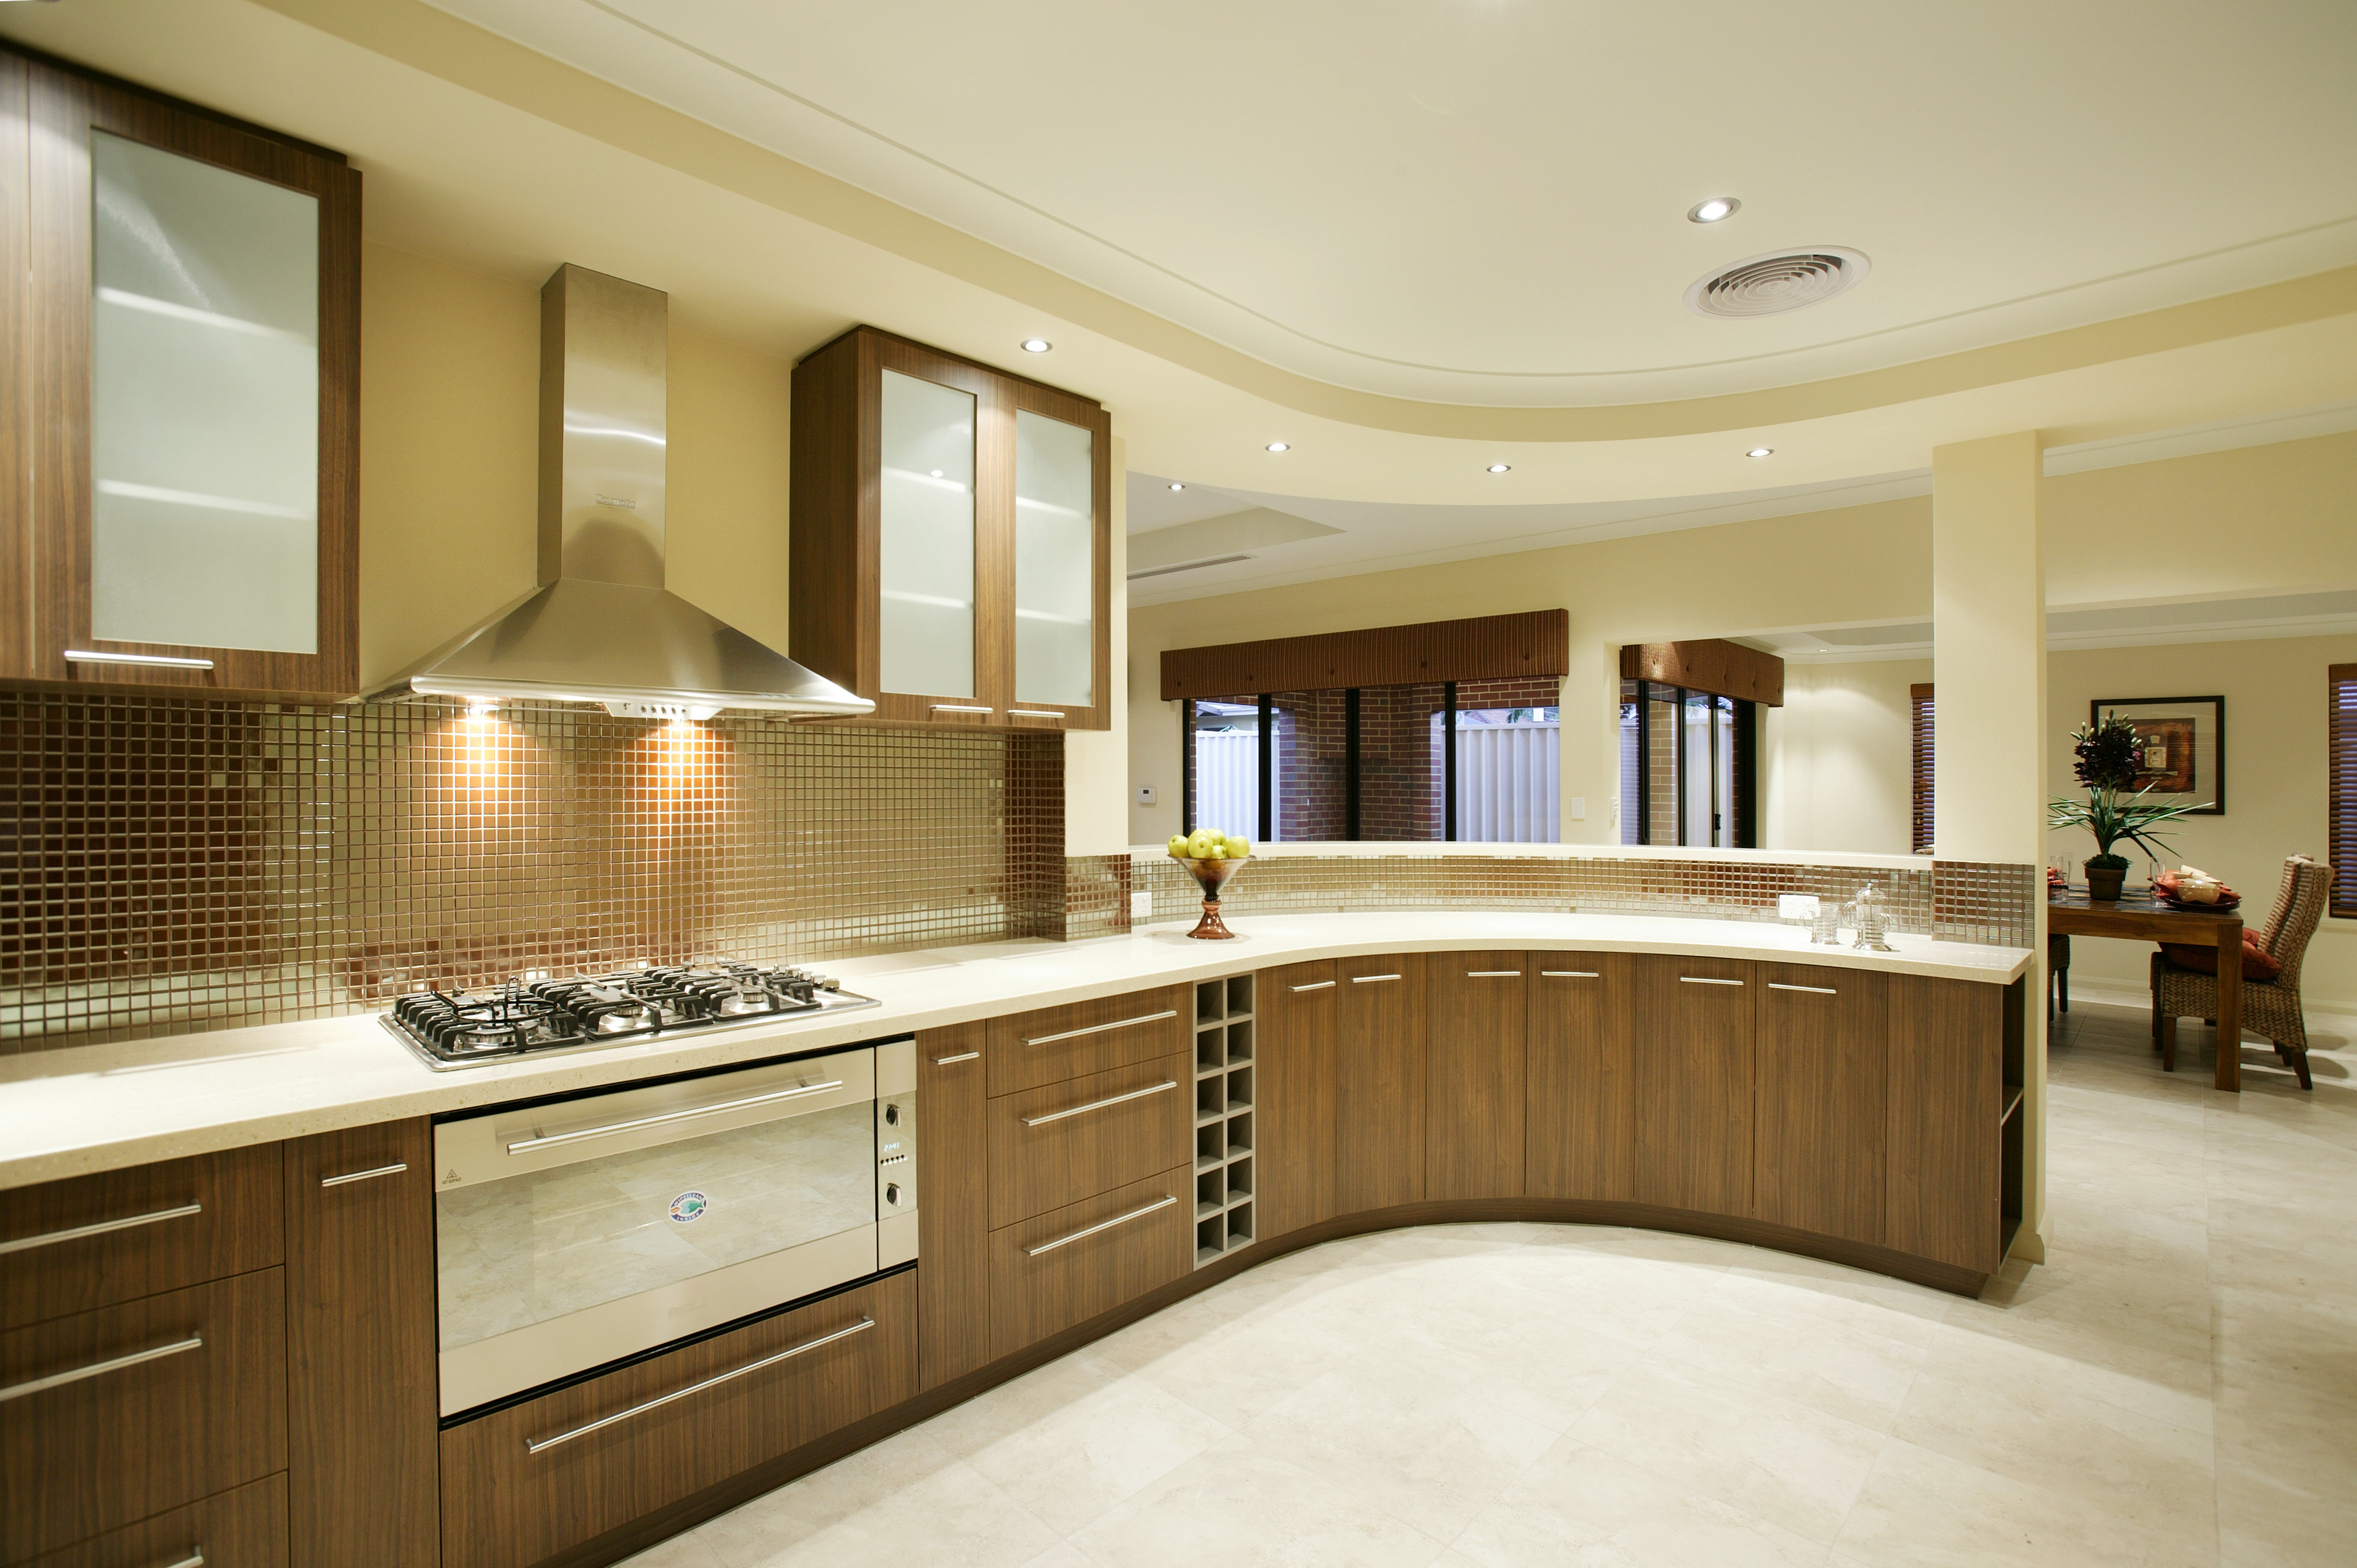 The Main Principles Of Kitchen Remodel Planning and Design Inspiration